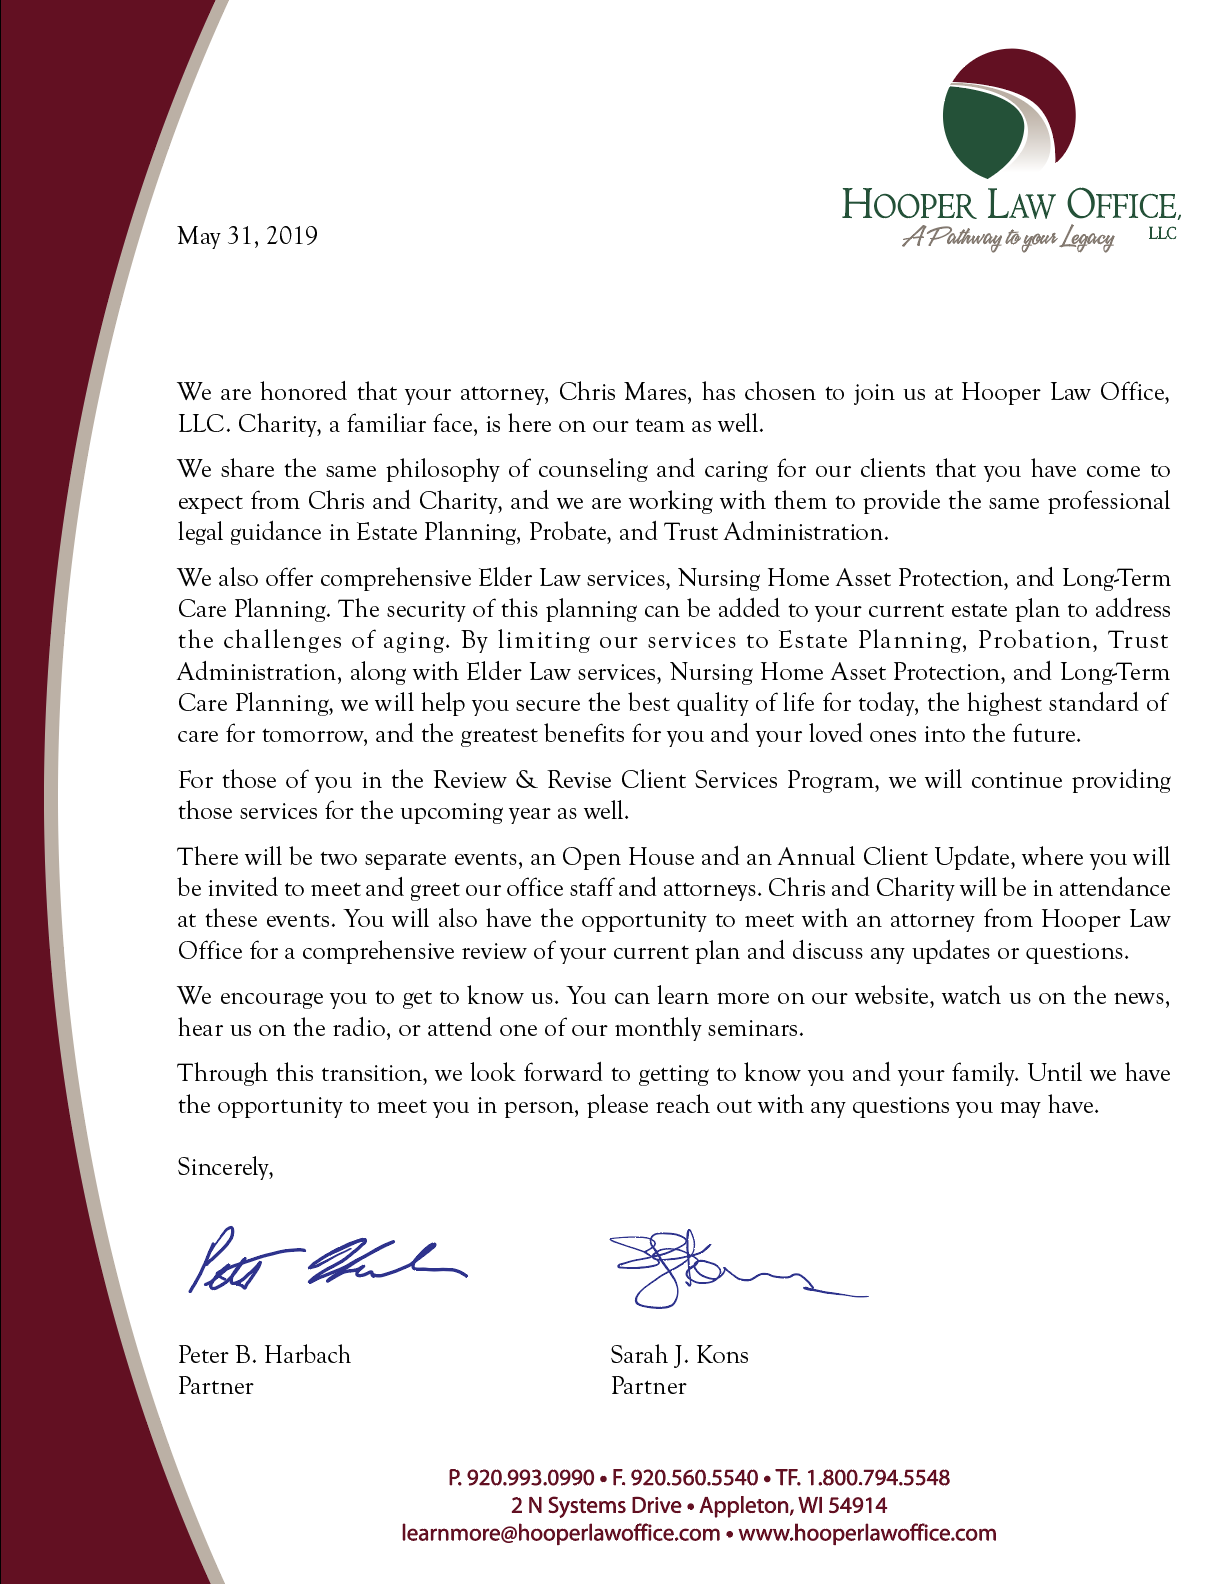 Announcing the Merger of Chris J. Mares, S.C., and Hooper Law Office LLC